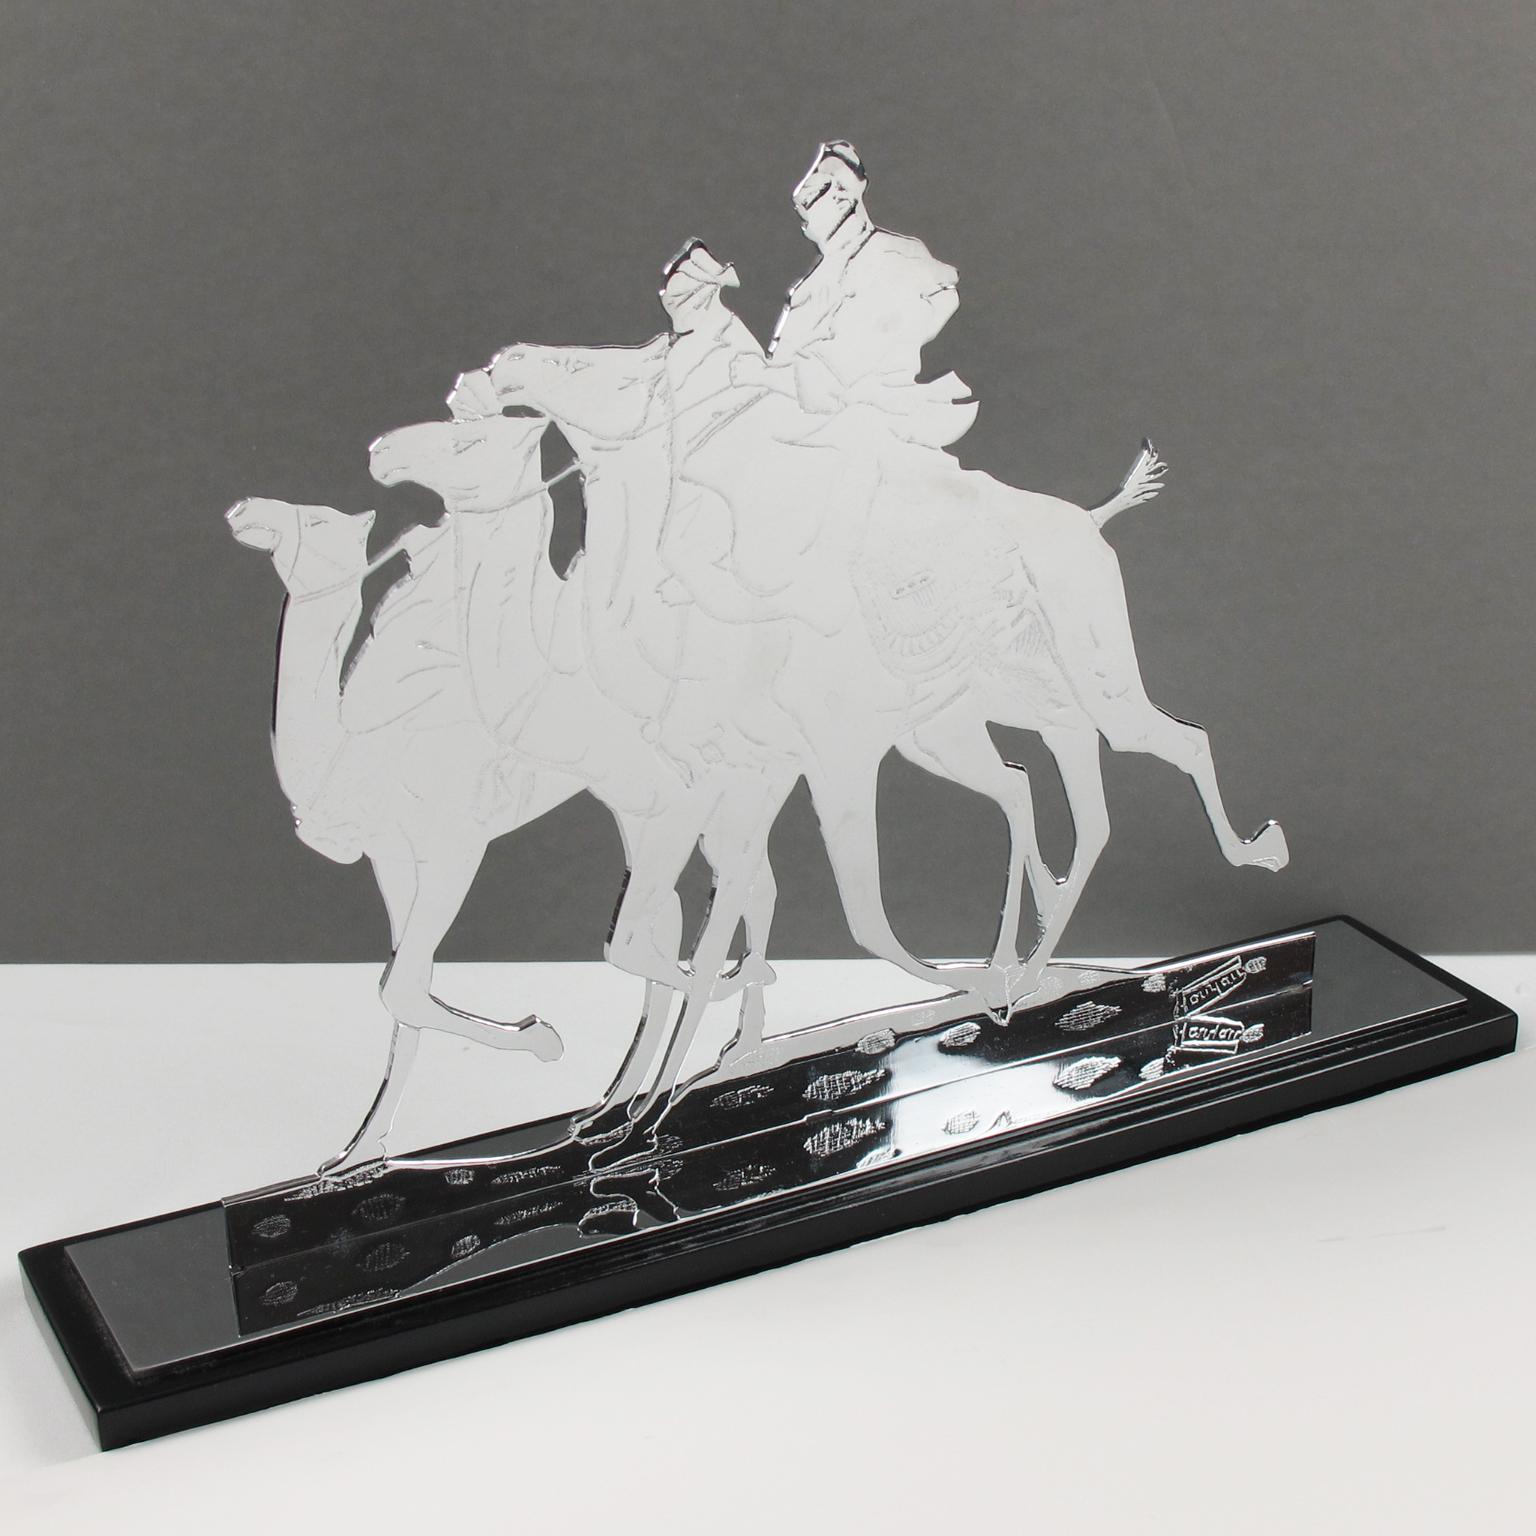 This beautiful French Art Deco chromed metal profile sculpture features Saharan characters, possibly nomads or Touareg (Tuareg,) sitting on camels in amazingly realistic riding action. The heavy-quality metal has a signature on the side. Check the